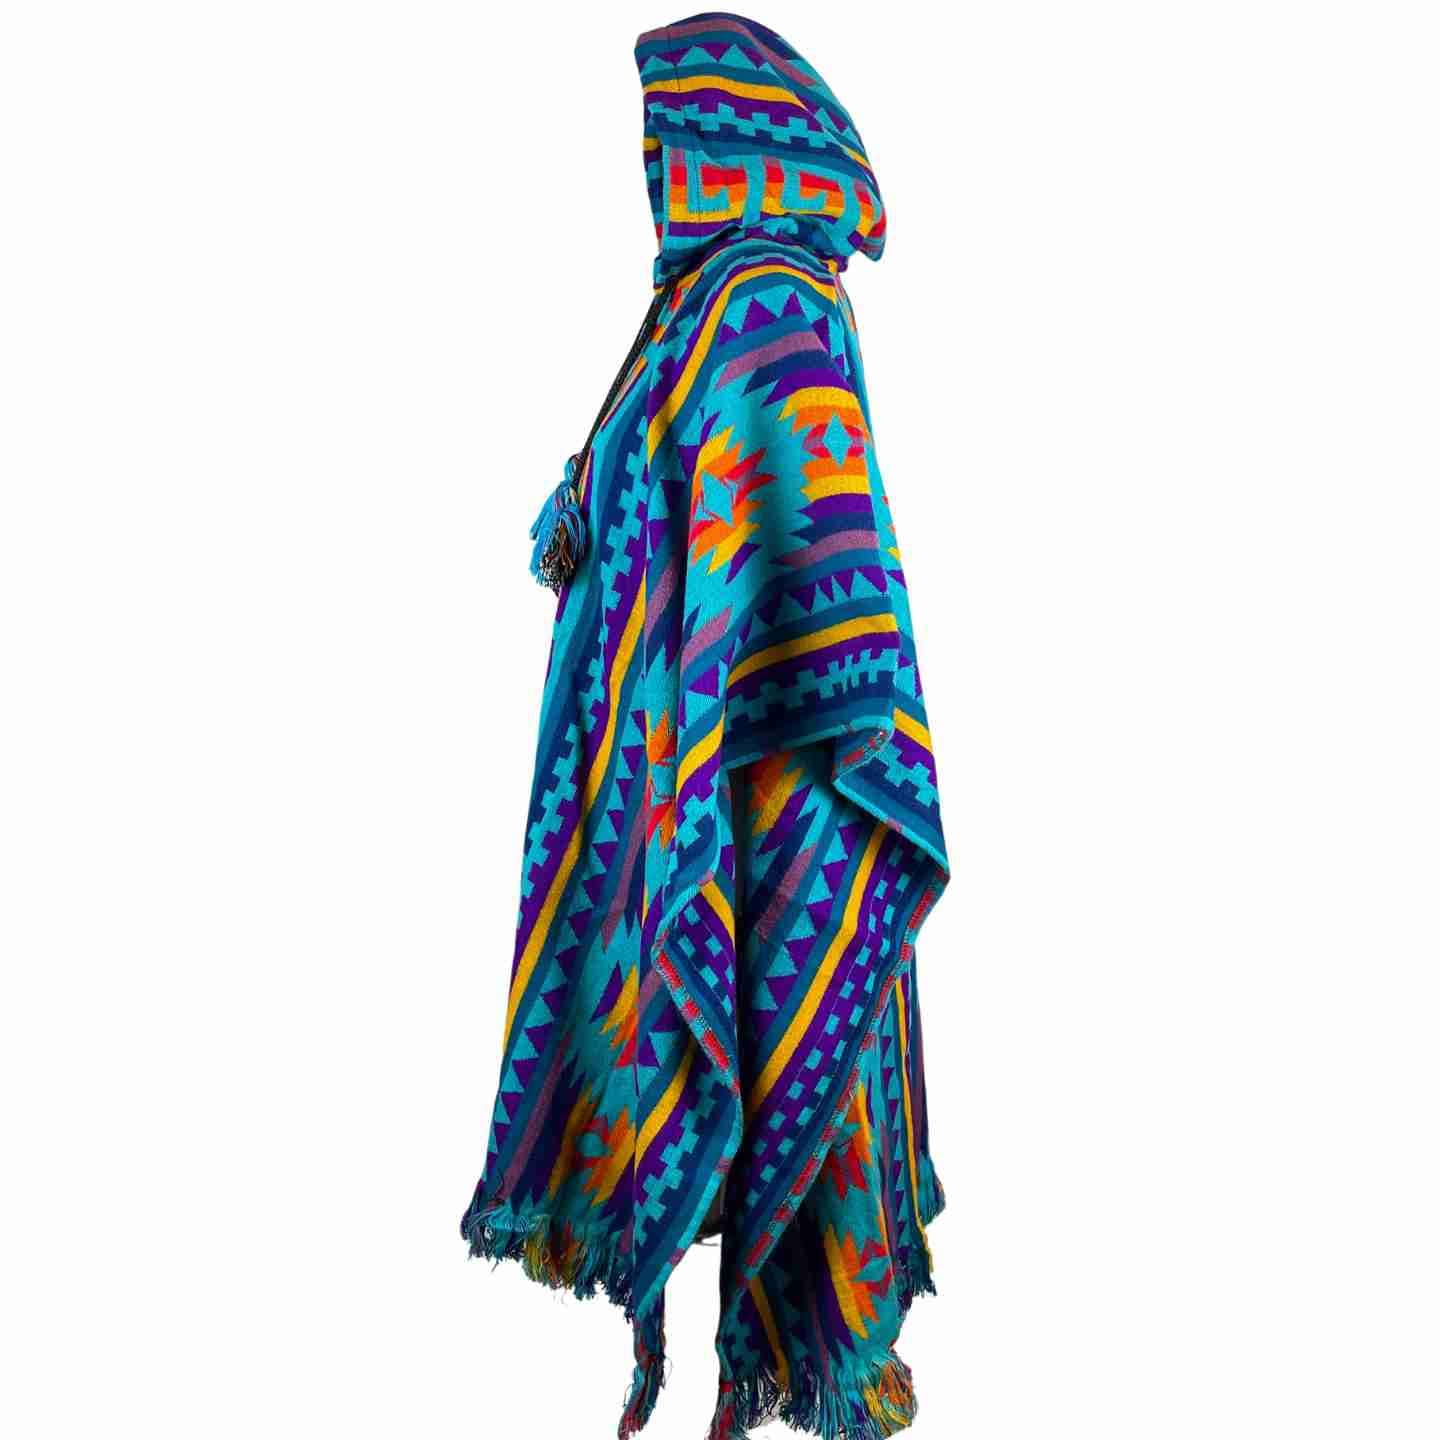 Stylish Men's Hooded Poncho | Teal Yellow Red